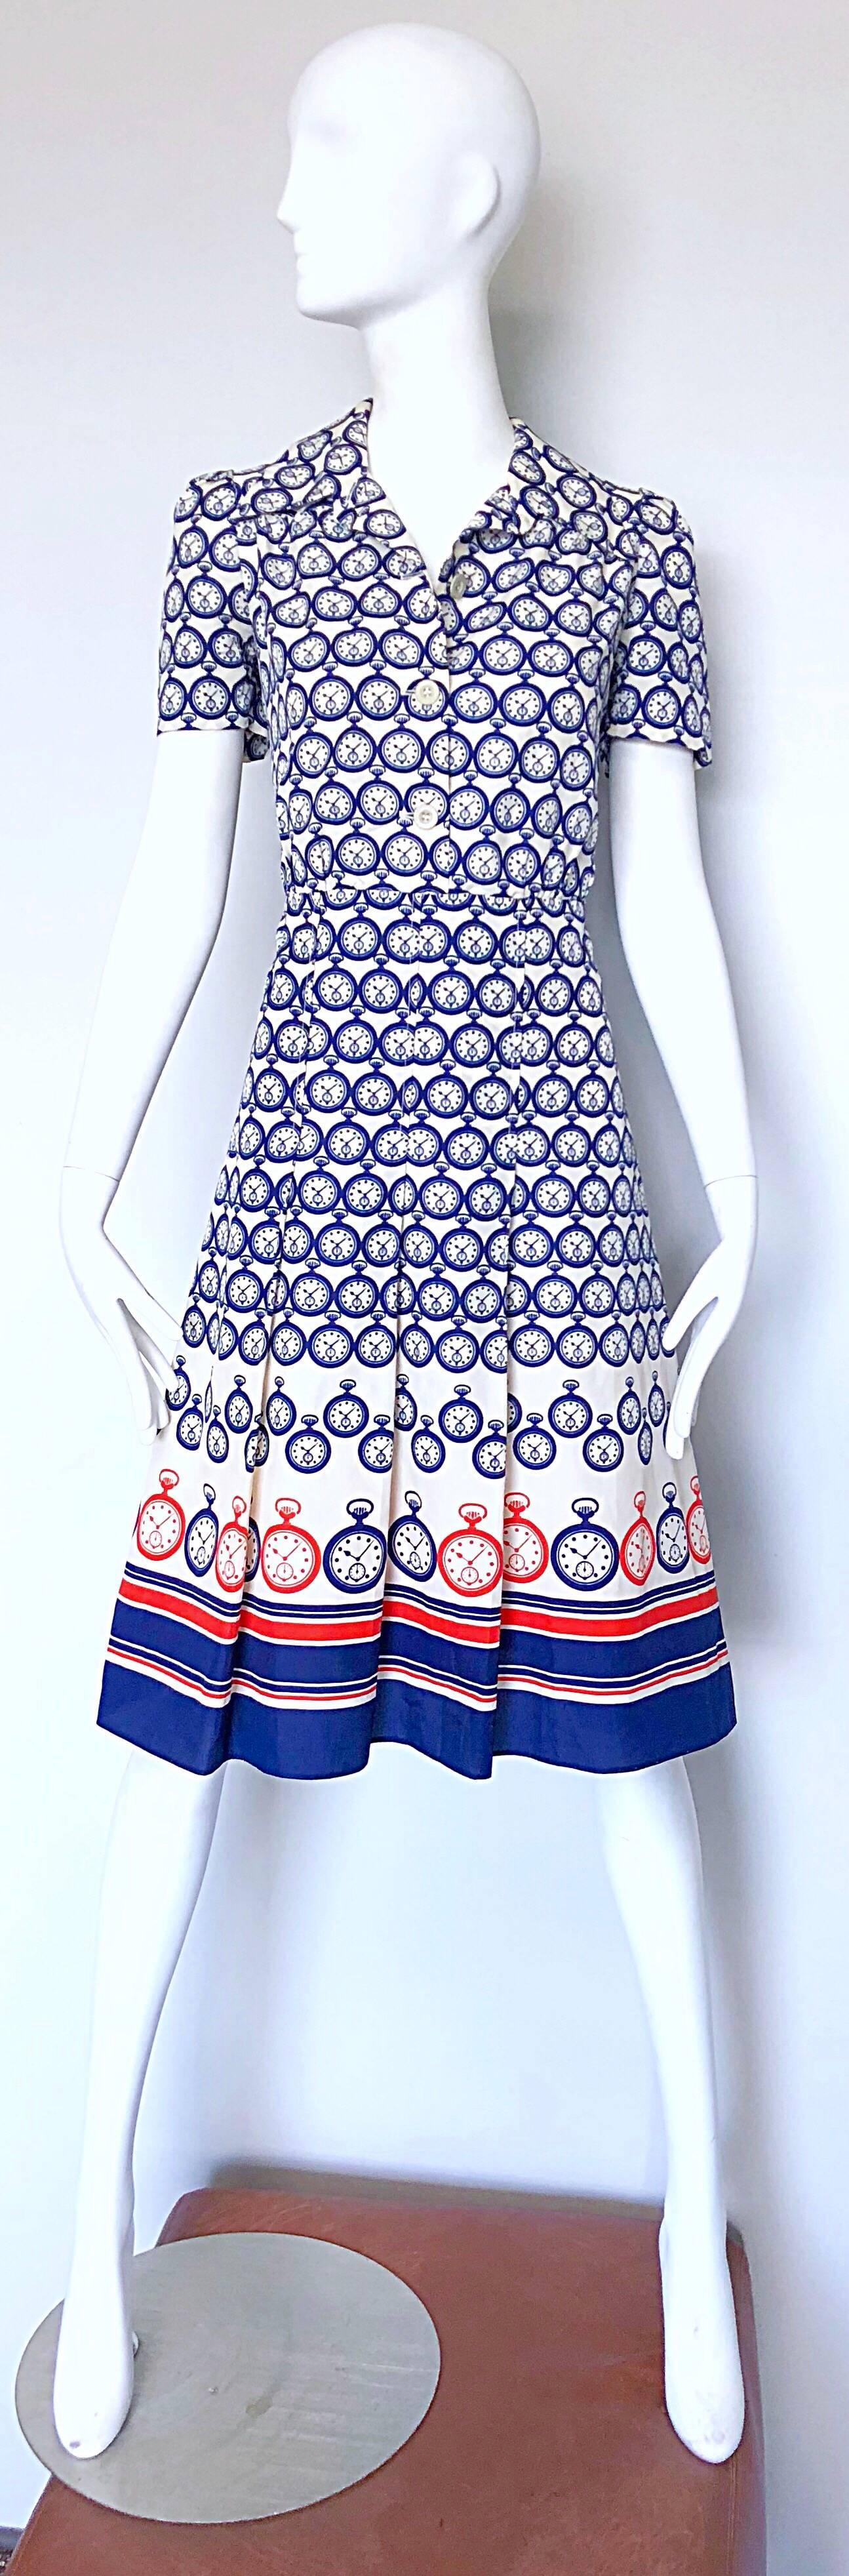 Chic vintage 1950s silk novelty pocket watch print silk fit n' flare nautical shirt dress! Features pocket watches printed throughout in red, white and navy blue. Buttons up the front with hidden zipper up the side. The possibilities are endless